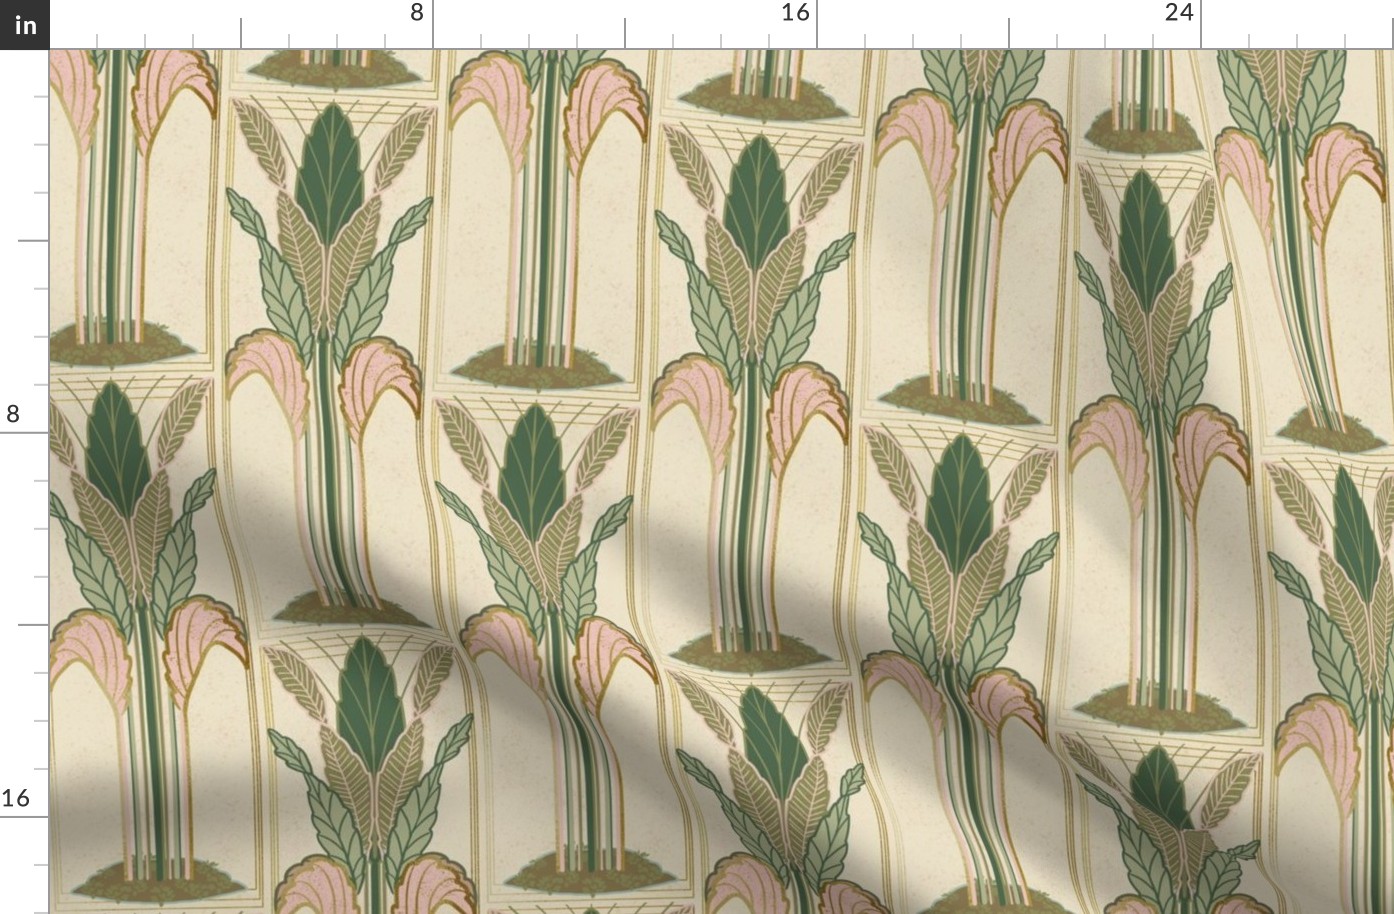 Art Deco Palms with Faux Gold "Foil" Pantone - Pink and Green (Medium)